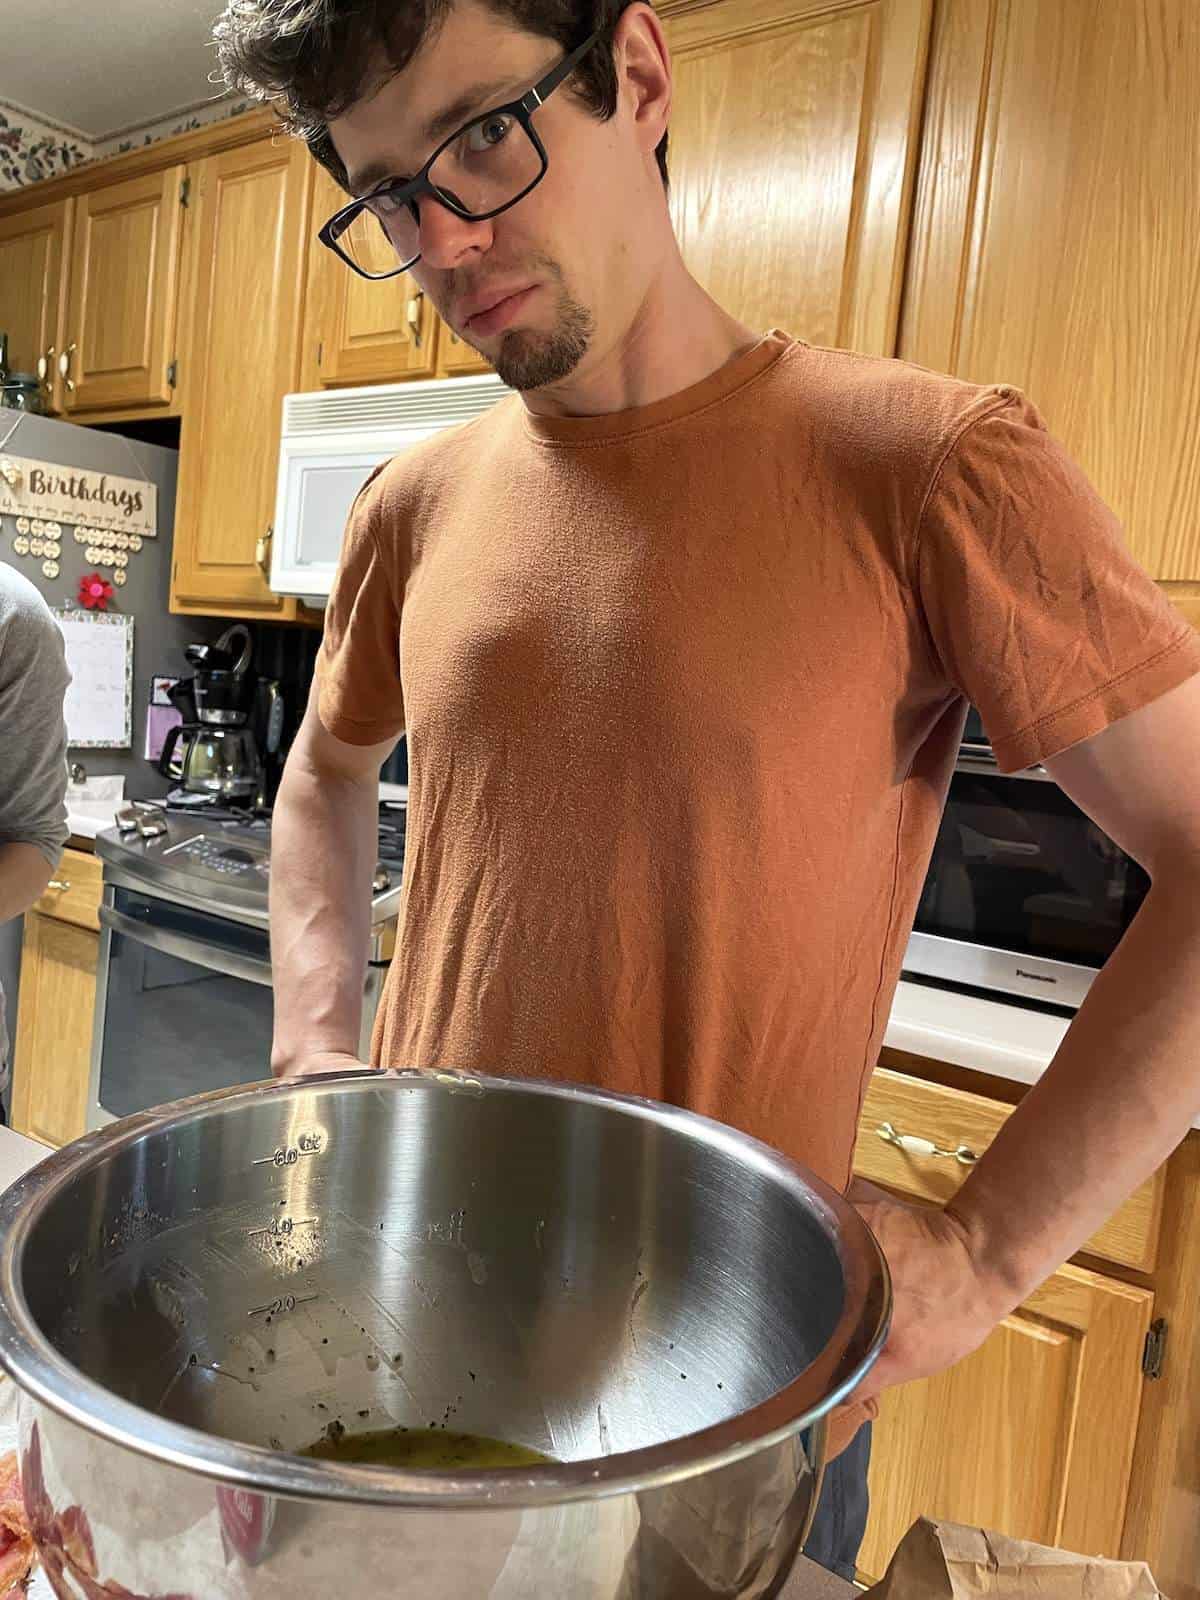 A man with glasses in a kitchen, glaring at the camera.